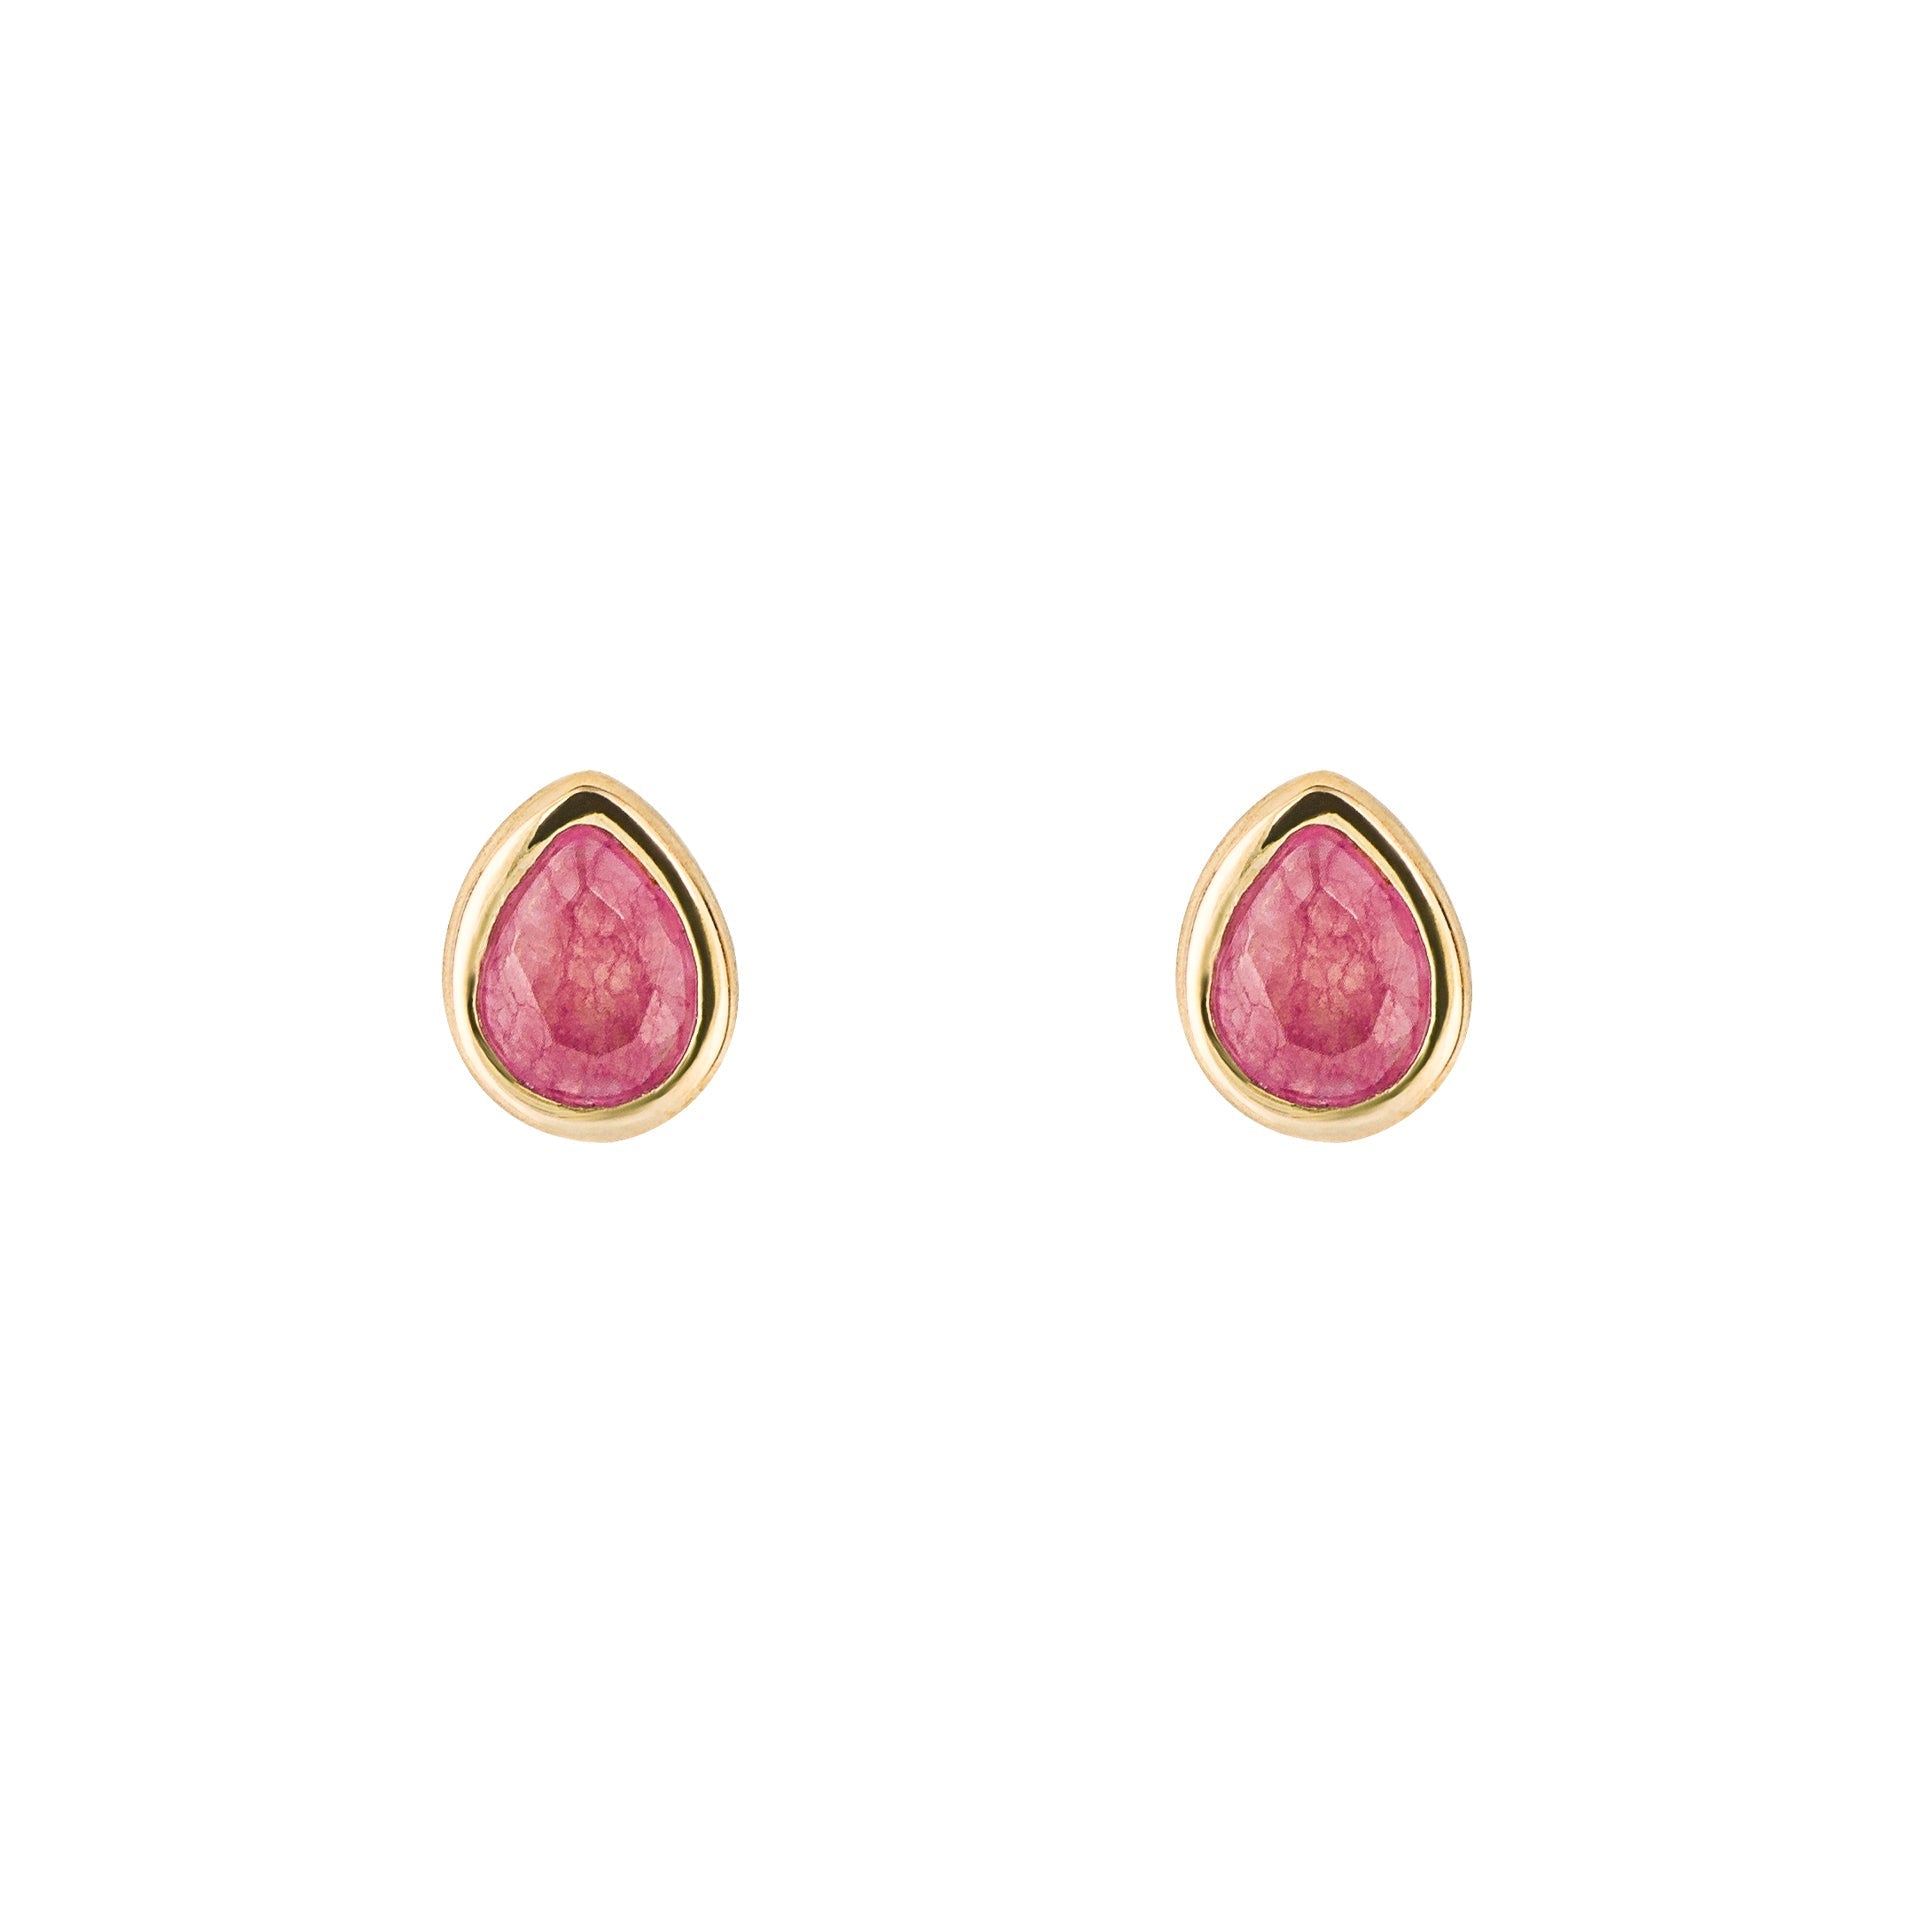 Pink quartz pear shaped studs, gold plated on silver. - Collected